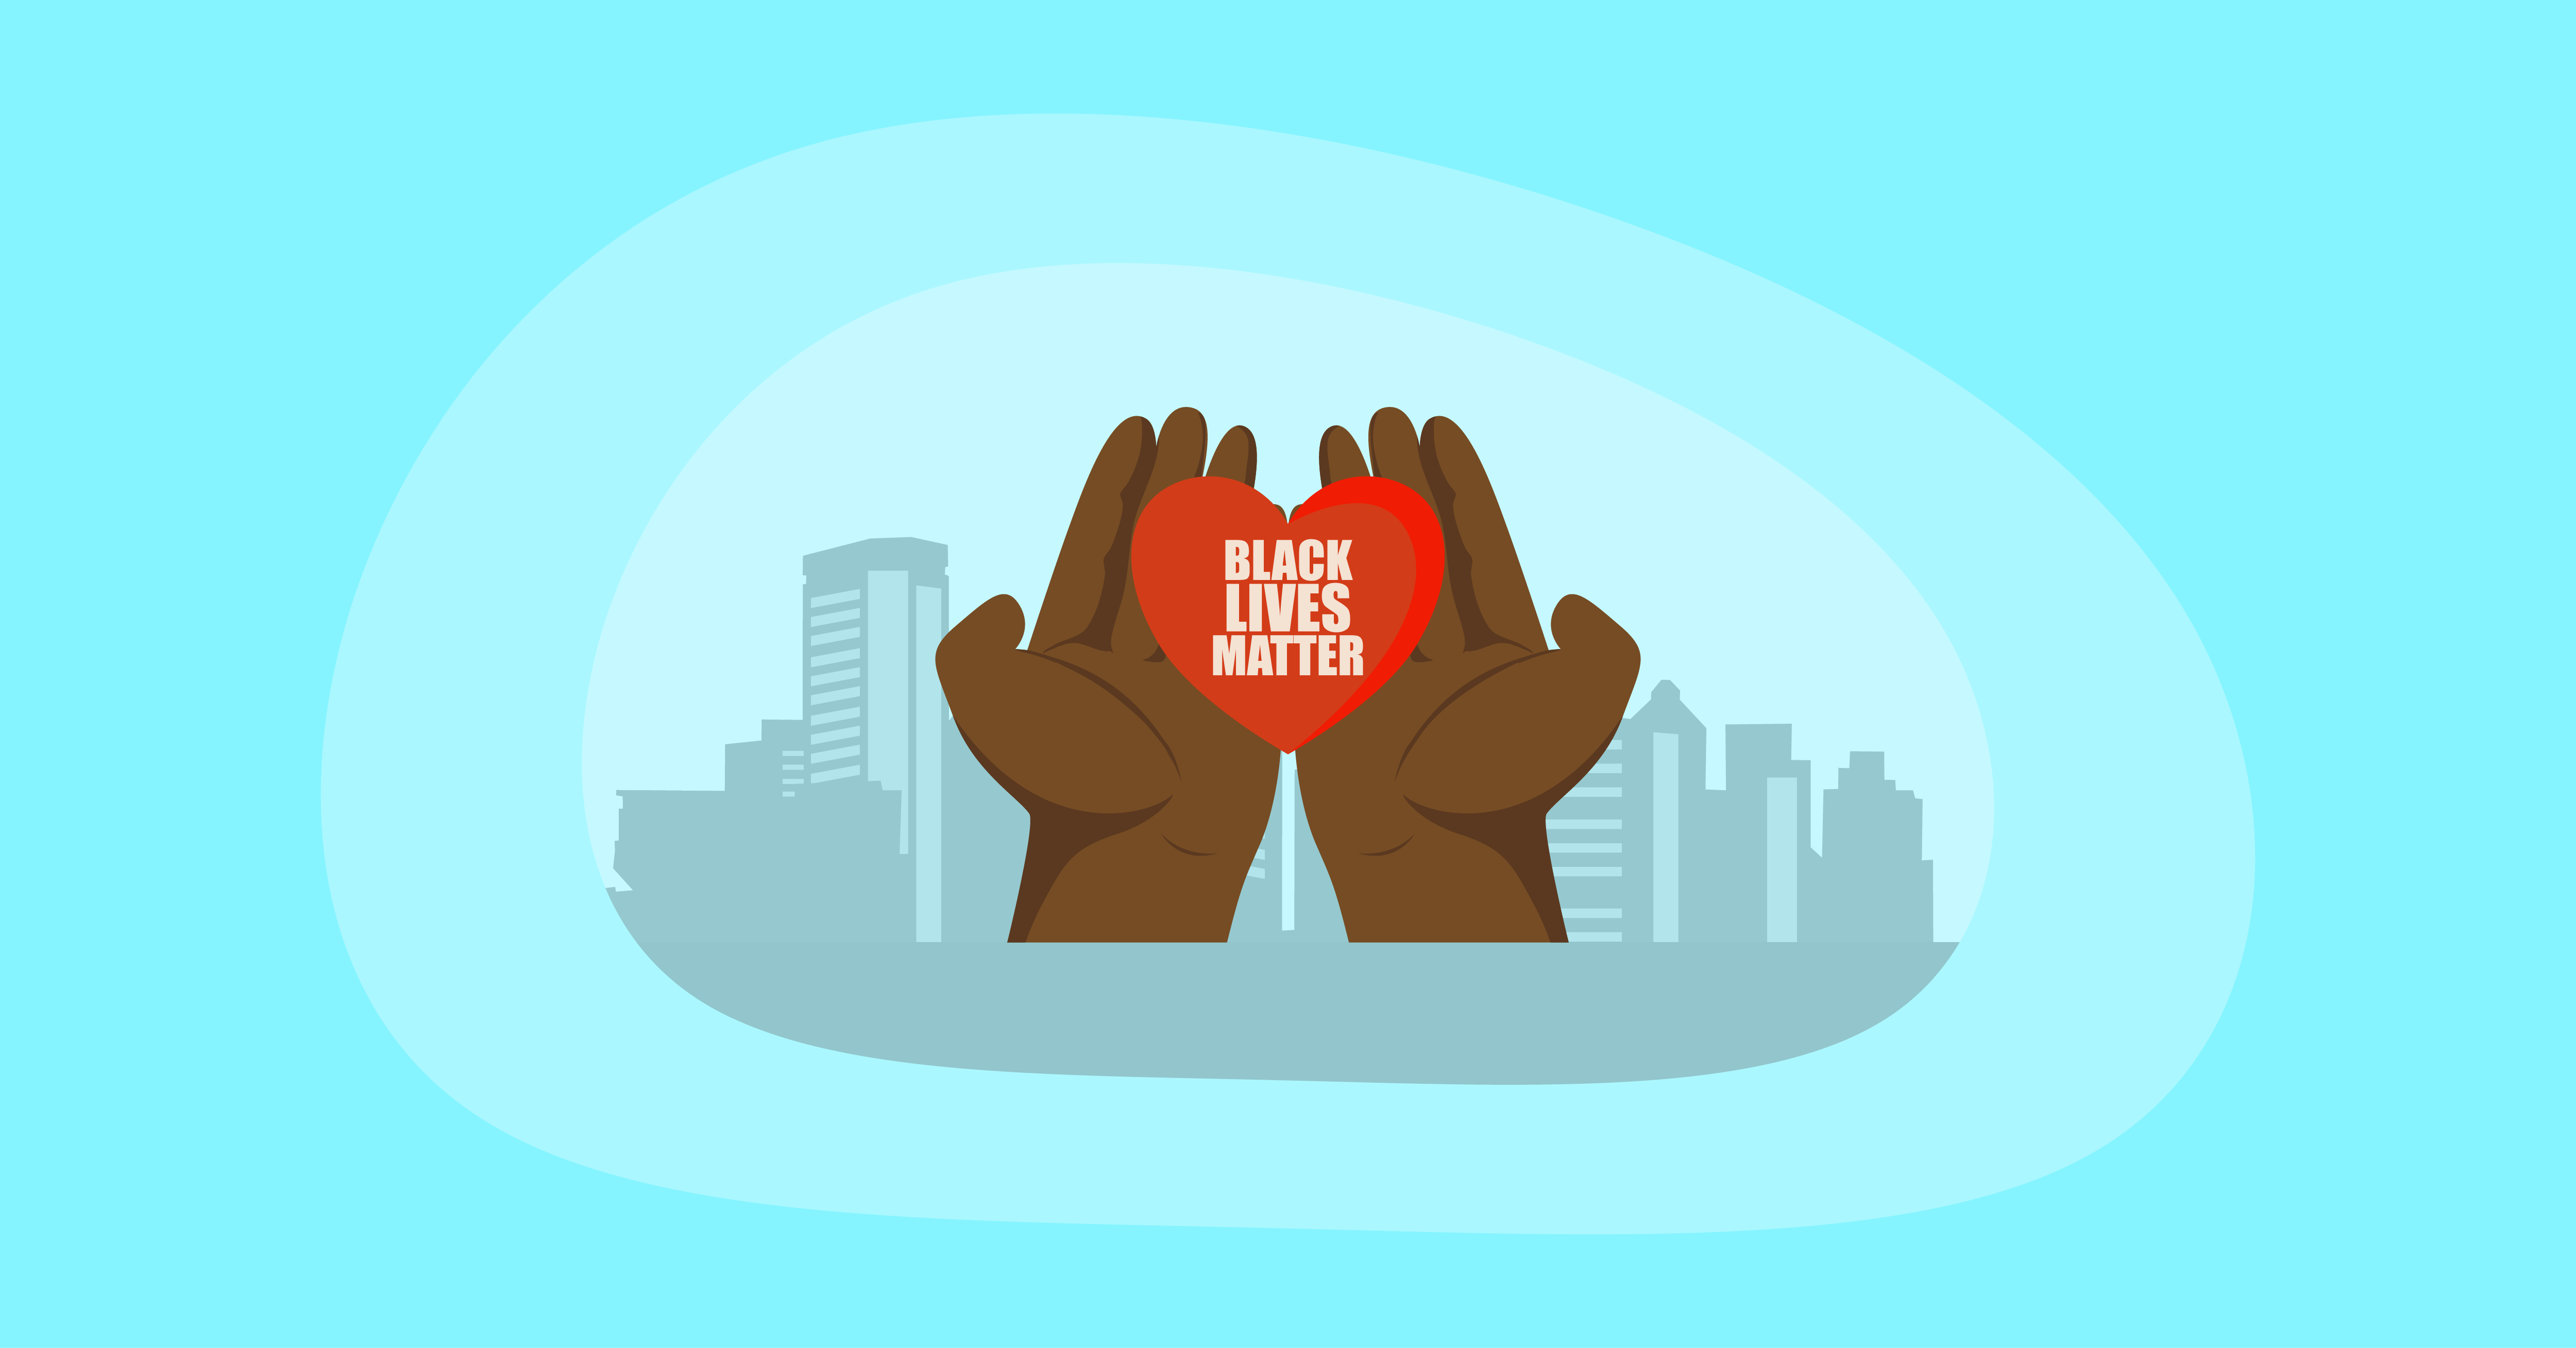 Attempted illustration of supporting the Black Lives matter movement